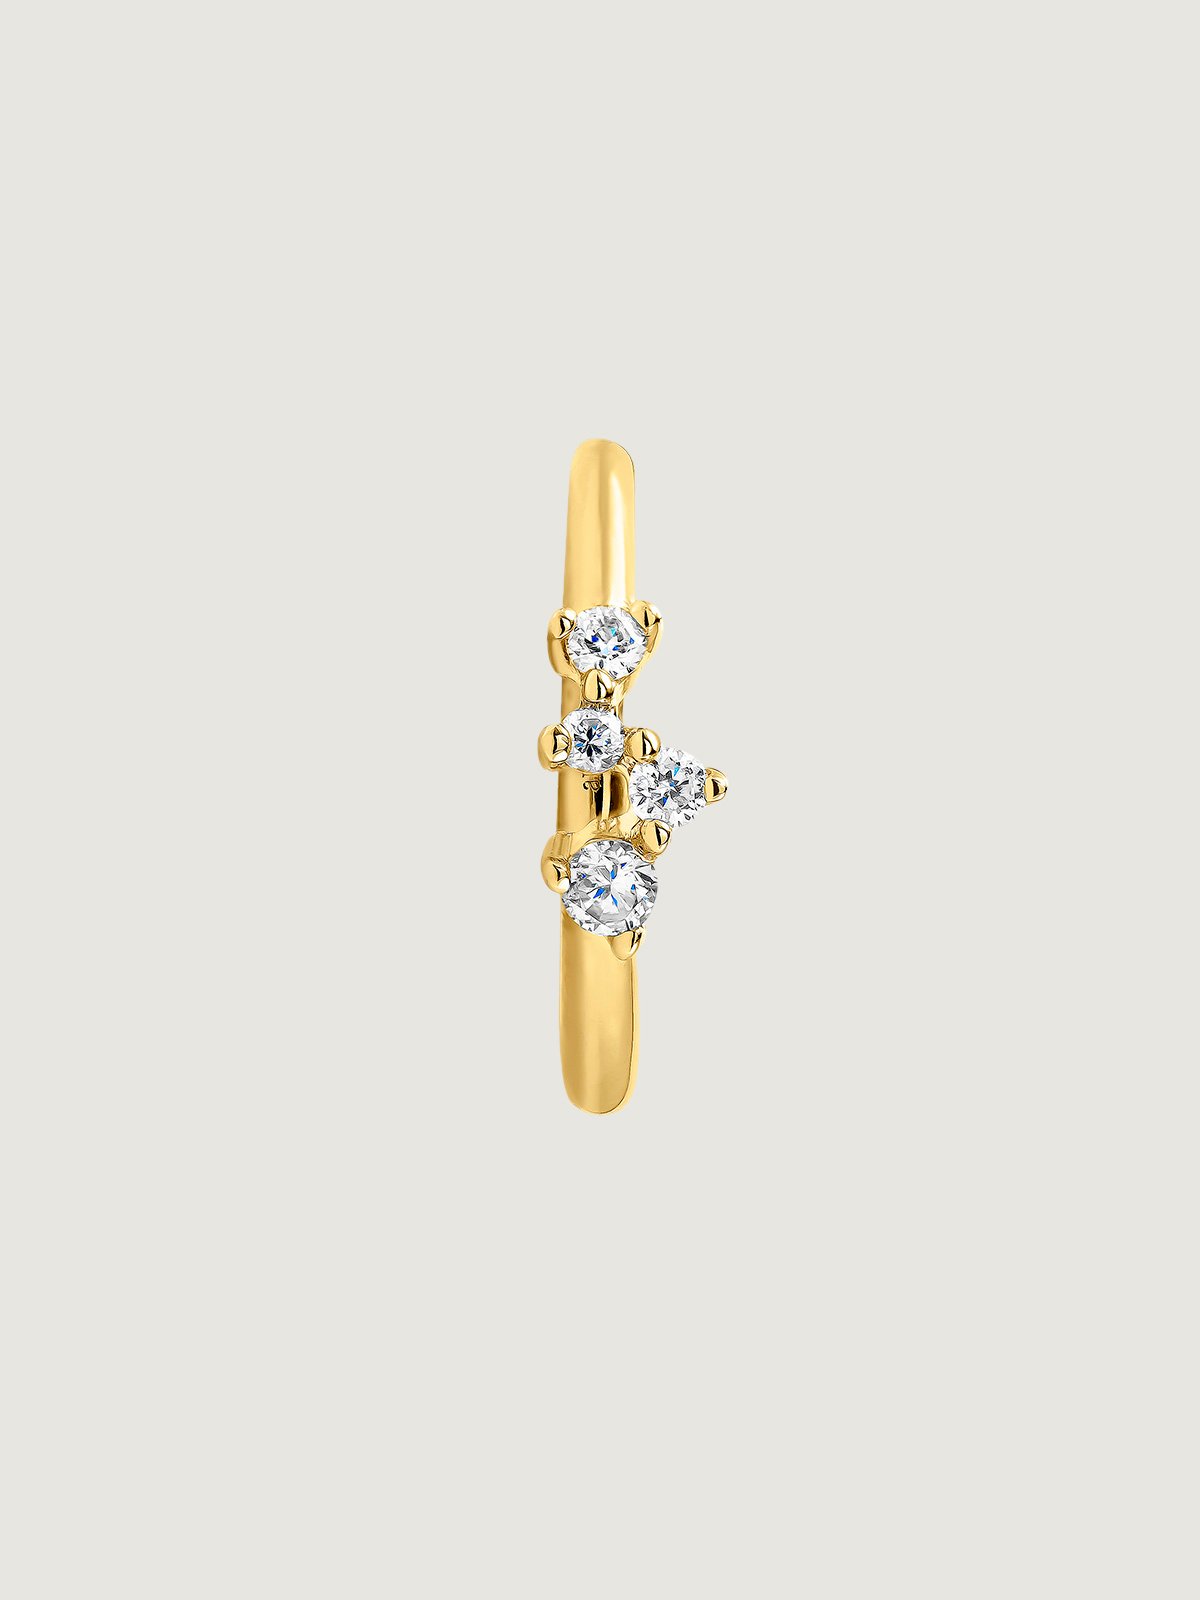 Individual small 9K yellow gold hoop earring with diamonds